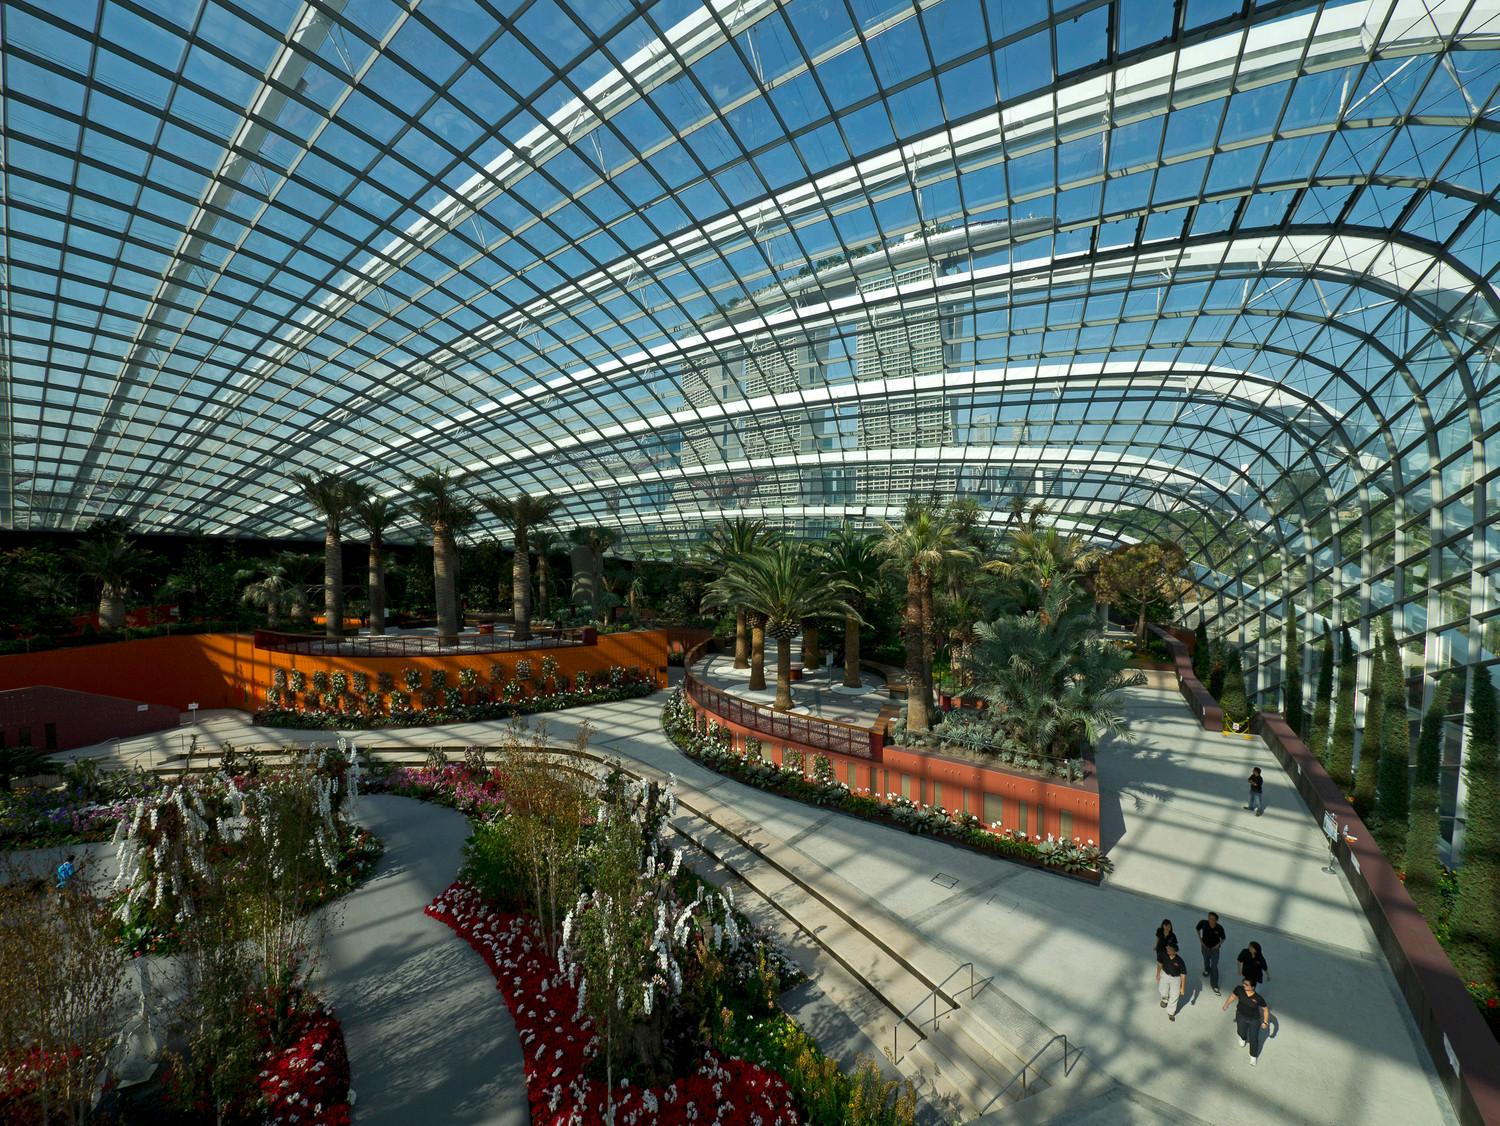 Internal view of Flower Dome